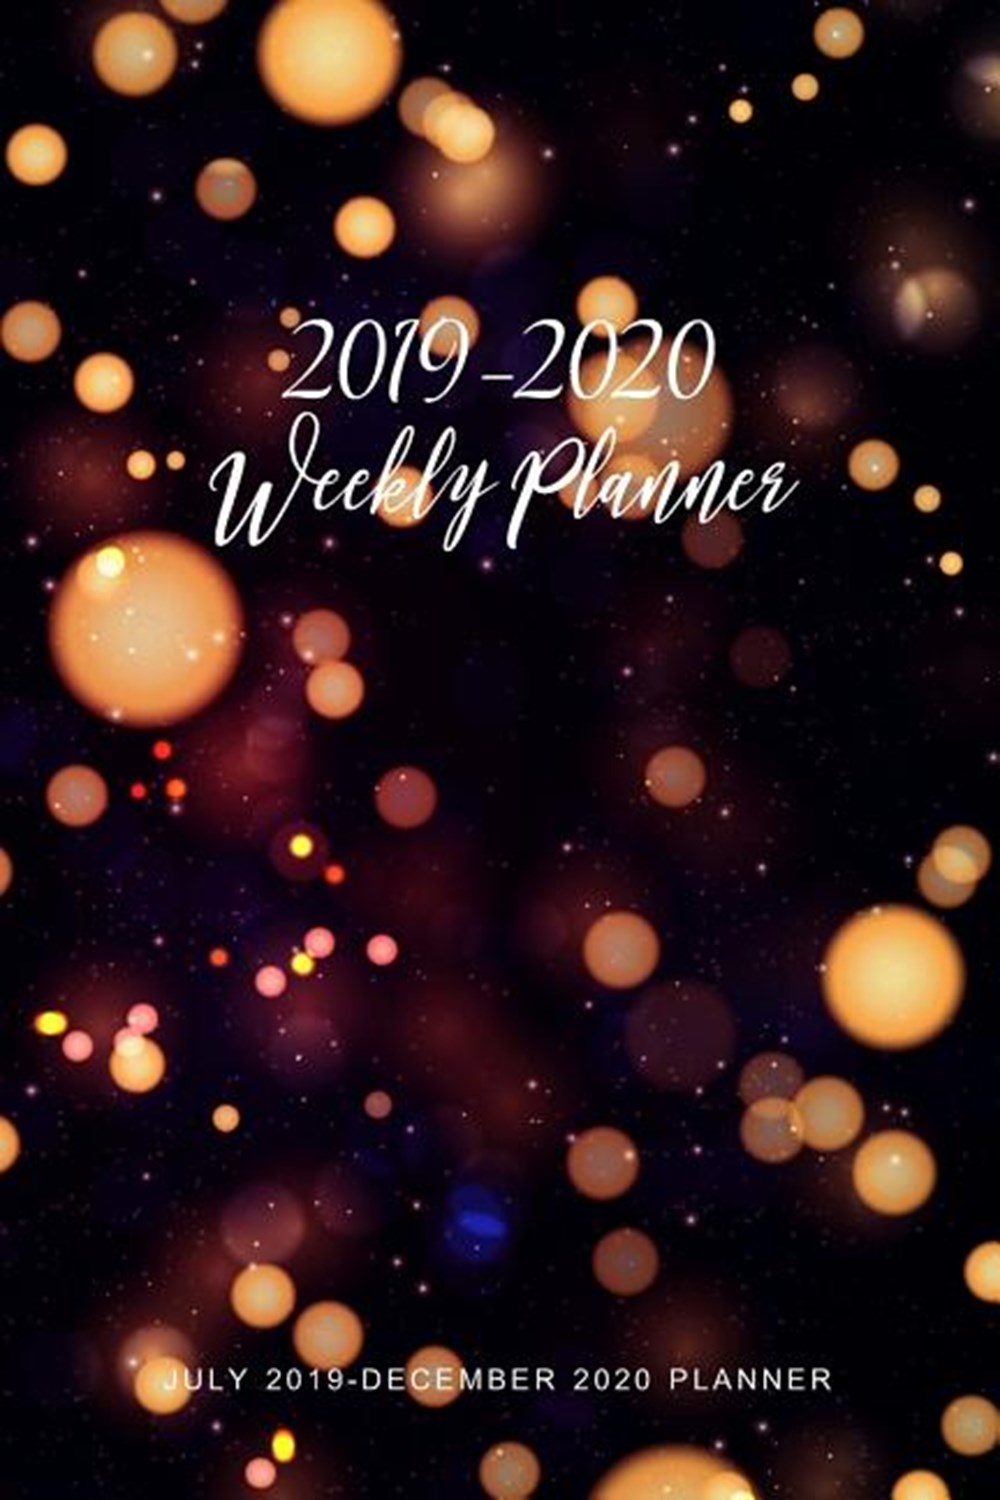 2019-2020 (July 2019-December 2020 Planner) Bokeh Background 18 Month Weekly Planner Daily Planner T